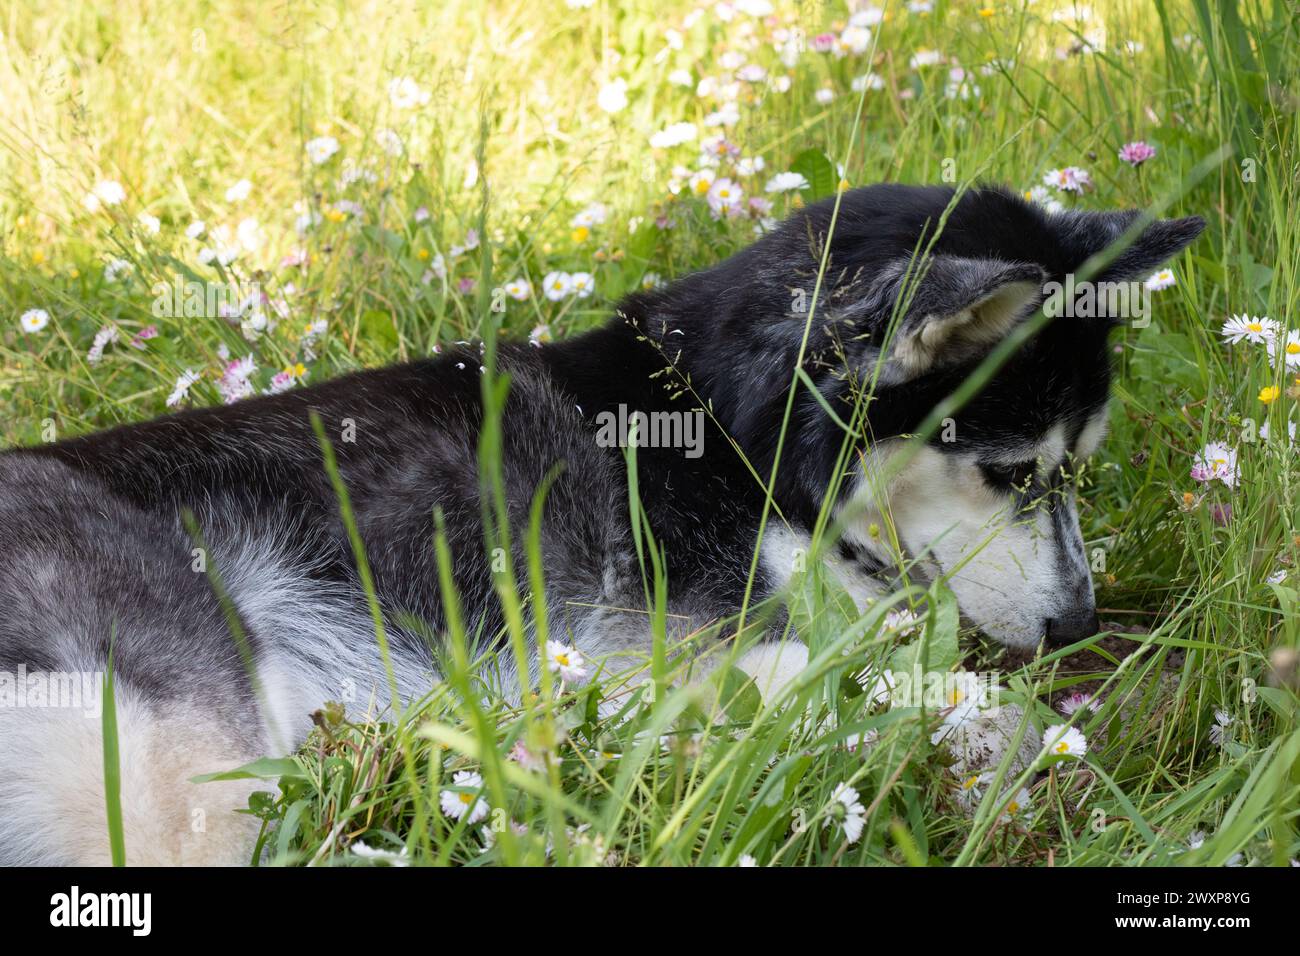 photography, husky dog, dog, image, pet, mammal, nature, animal, husky, outdoor, forest, fur, white, cute, young, purebred, siberian, looking,lying do Stock Photo